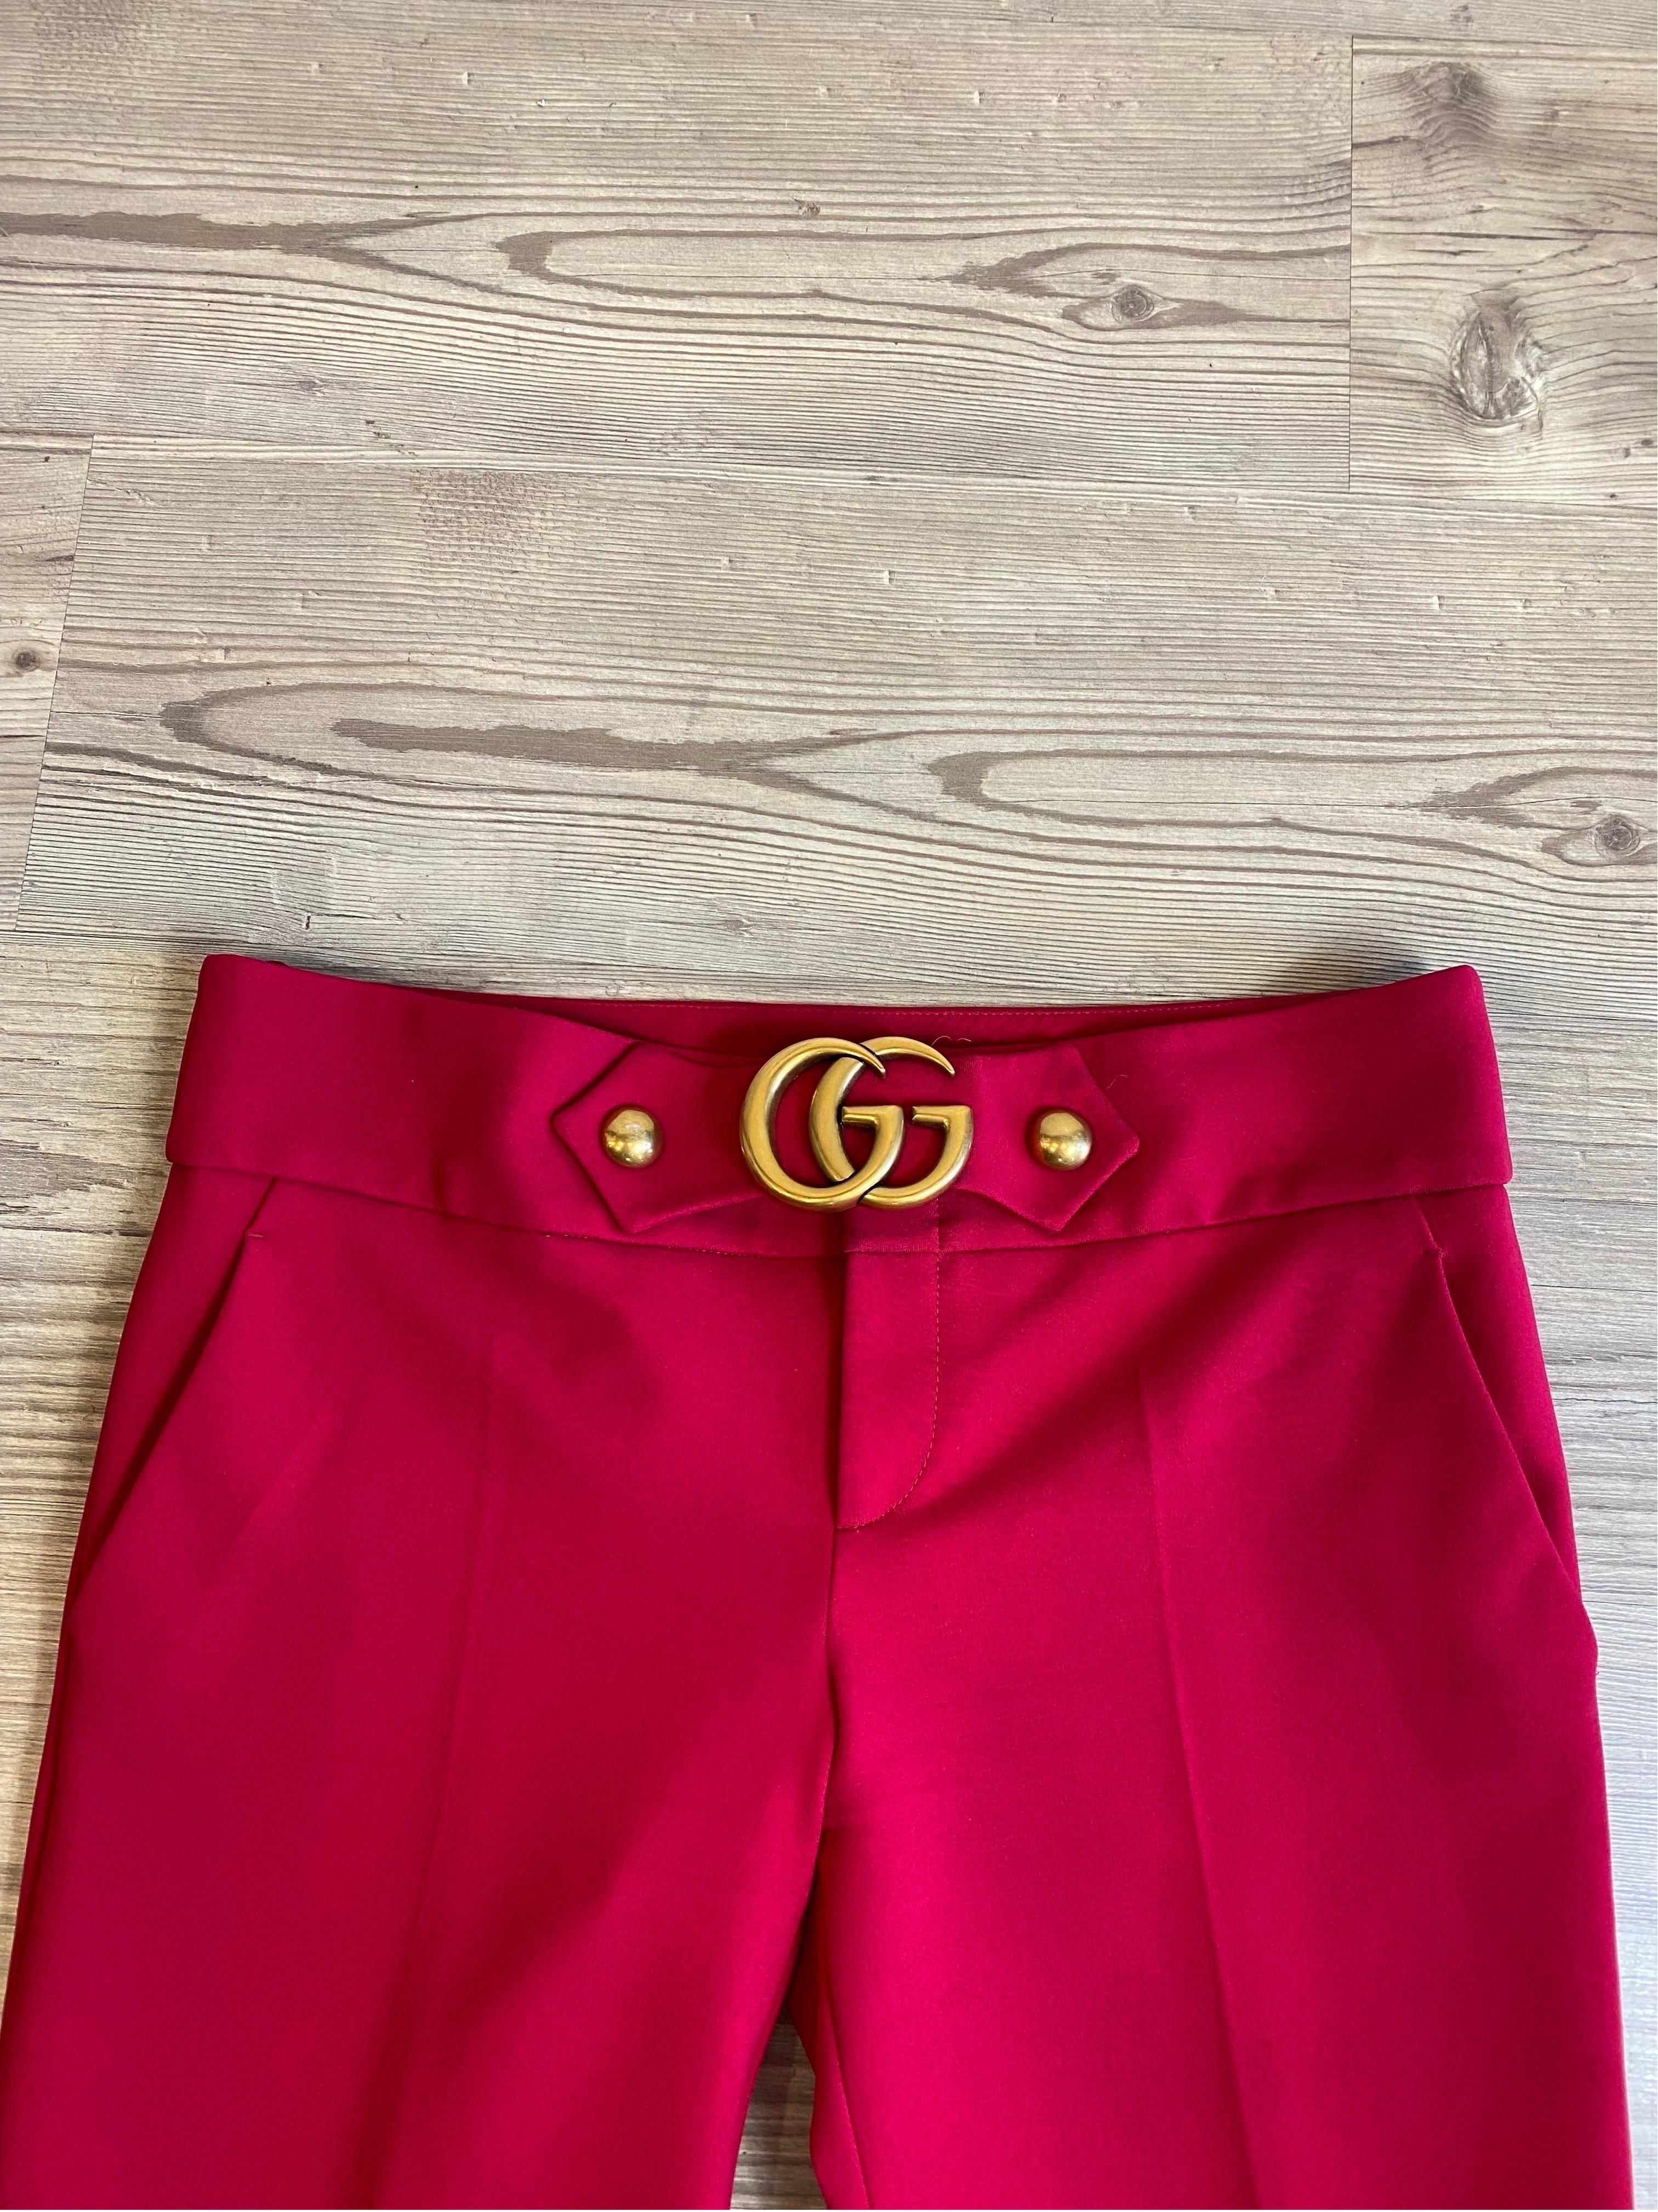 Gucci 2016 GG fuchsia Pants In Excellent Condition For Sale In Carnate, IT